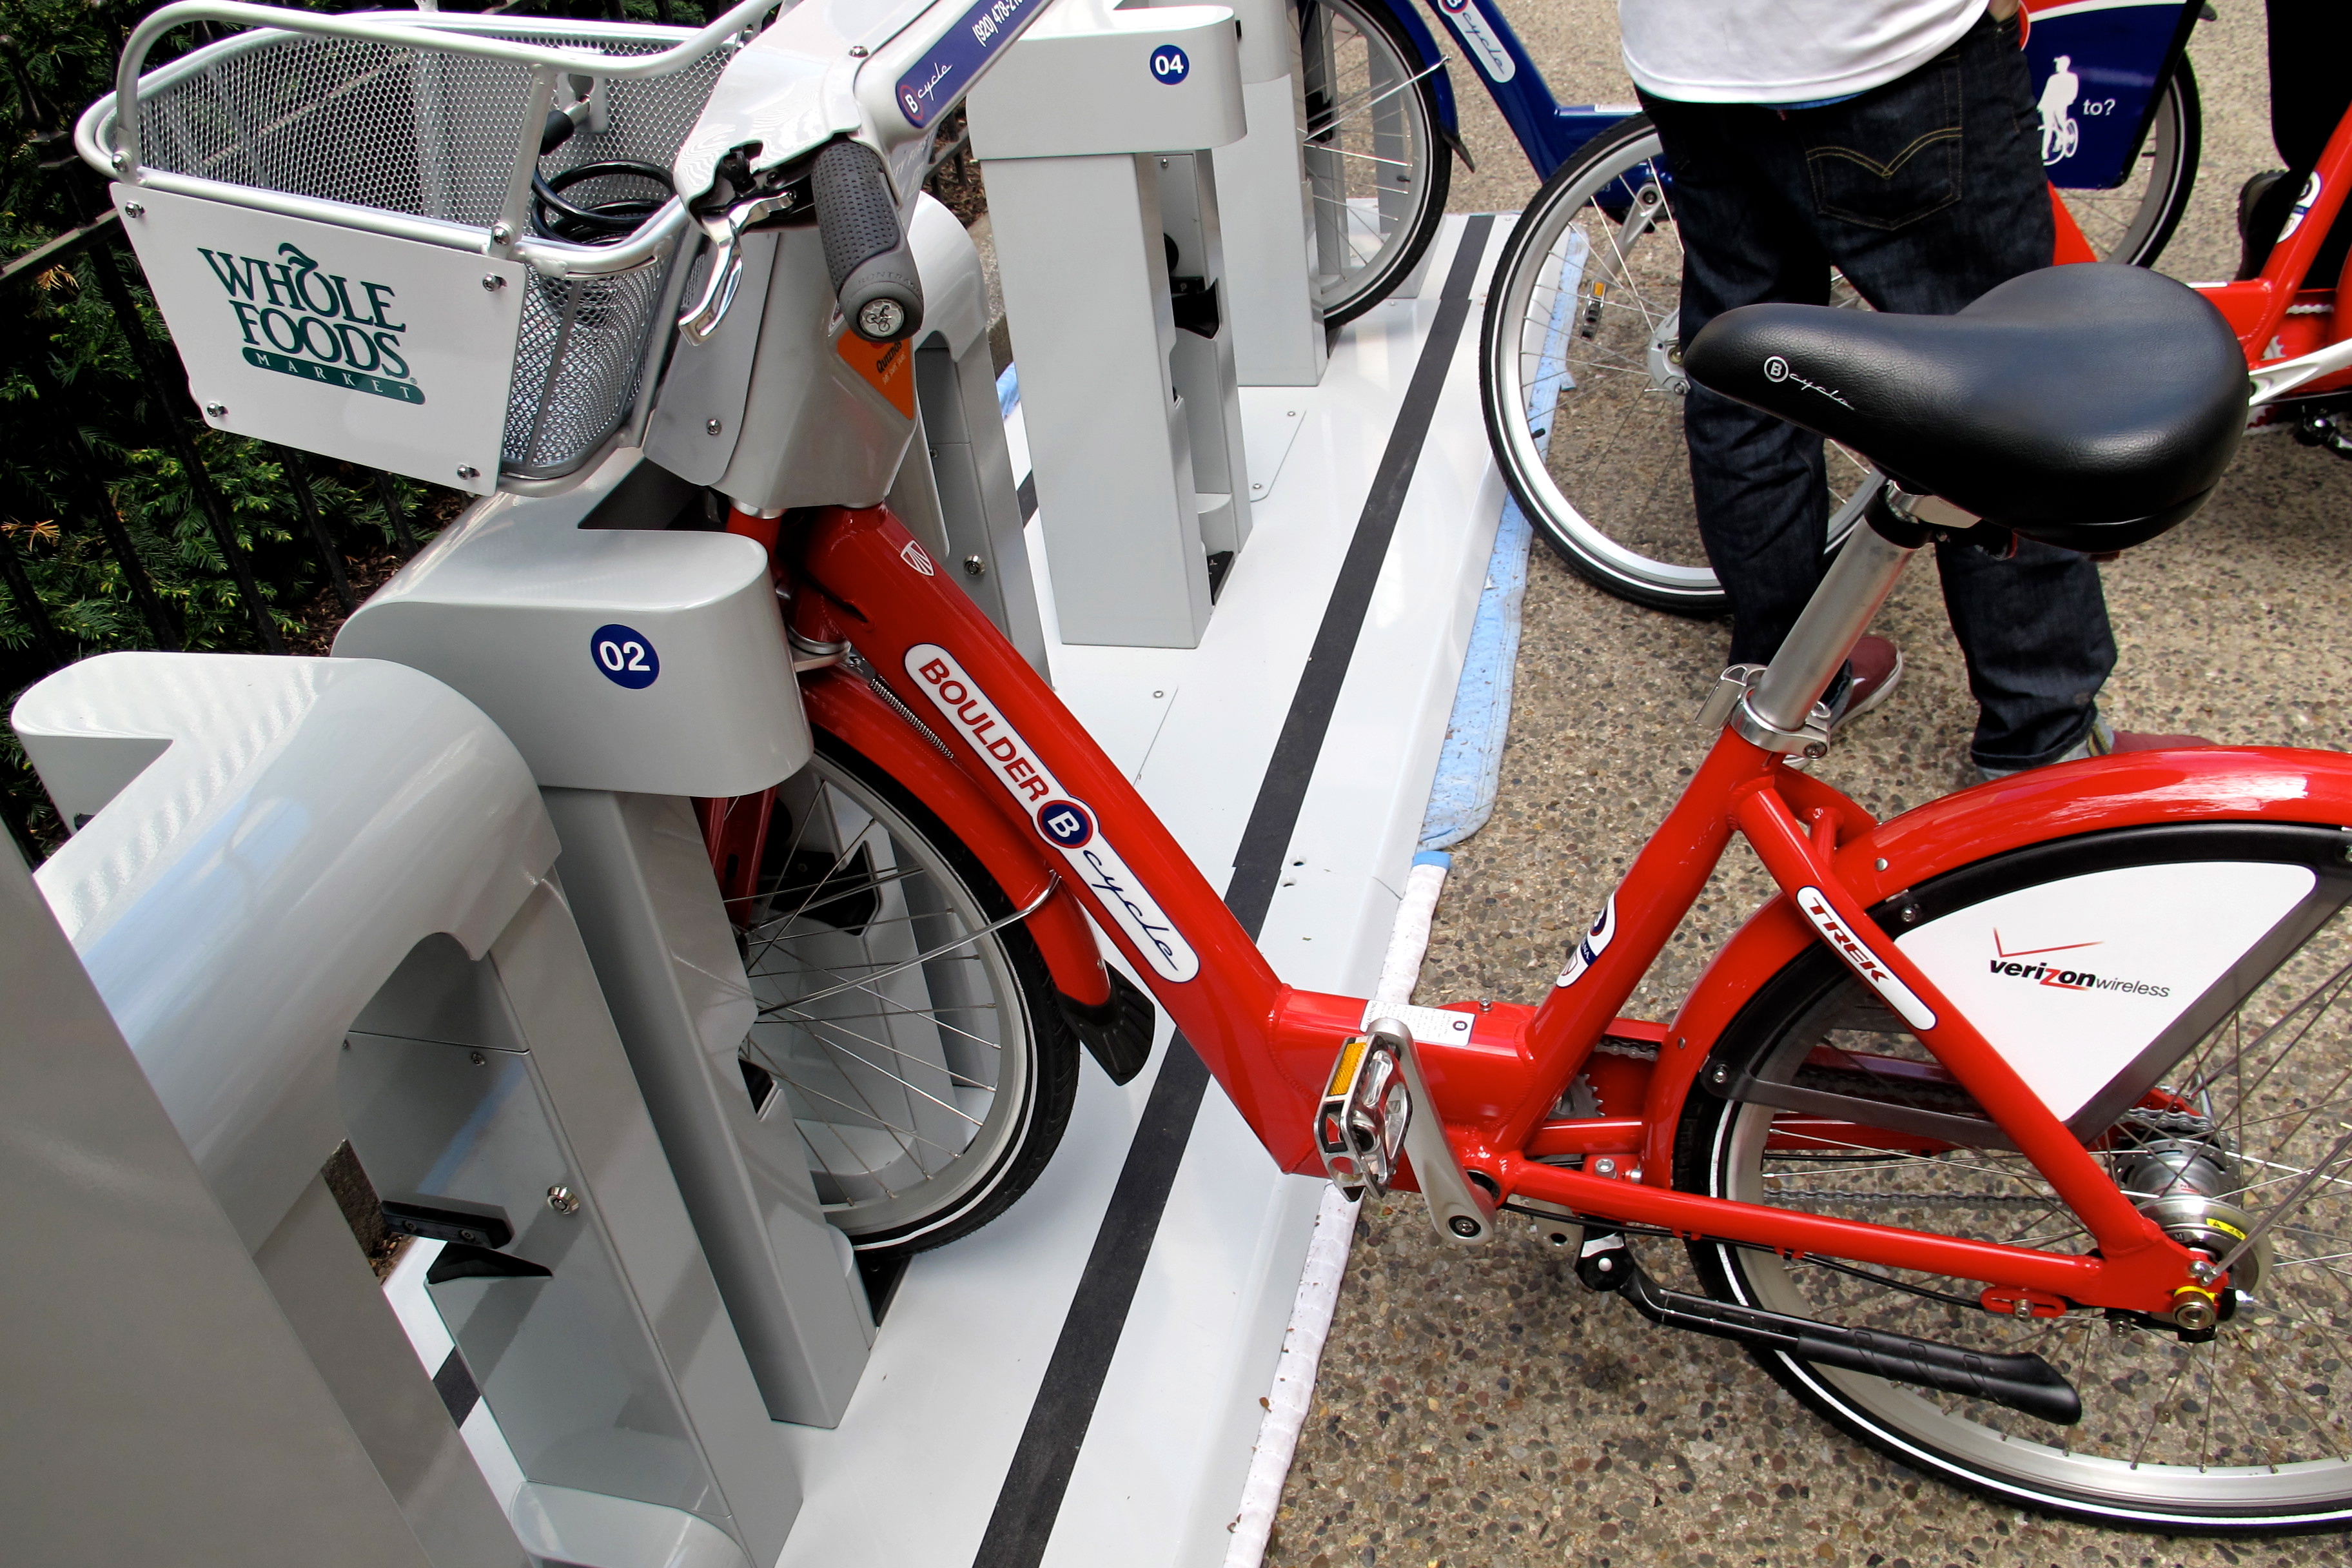 A B-cycle model from Boulder, showing two corporate sponsorships.